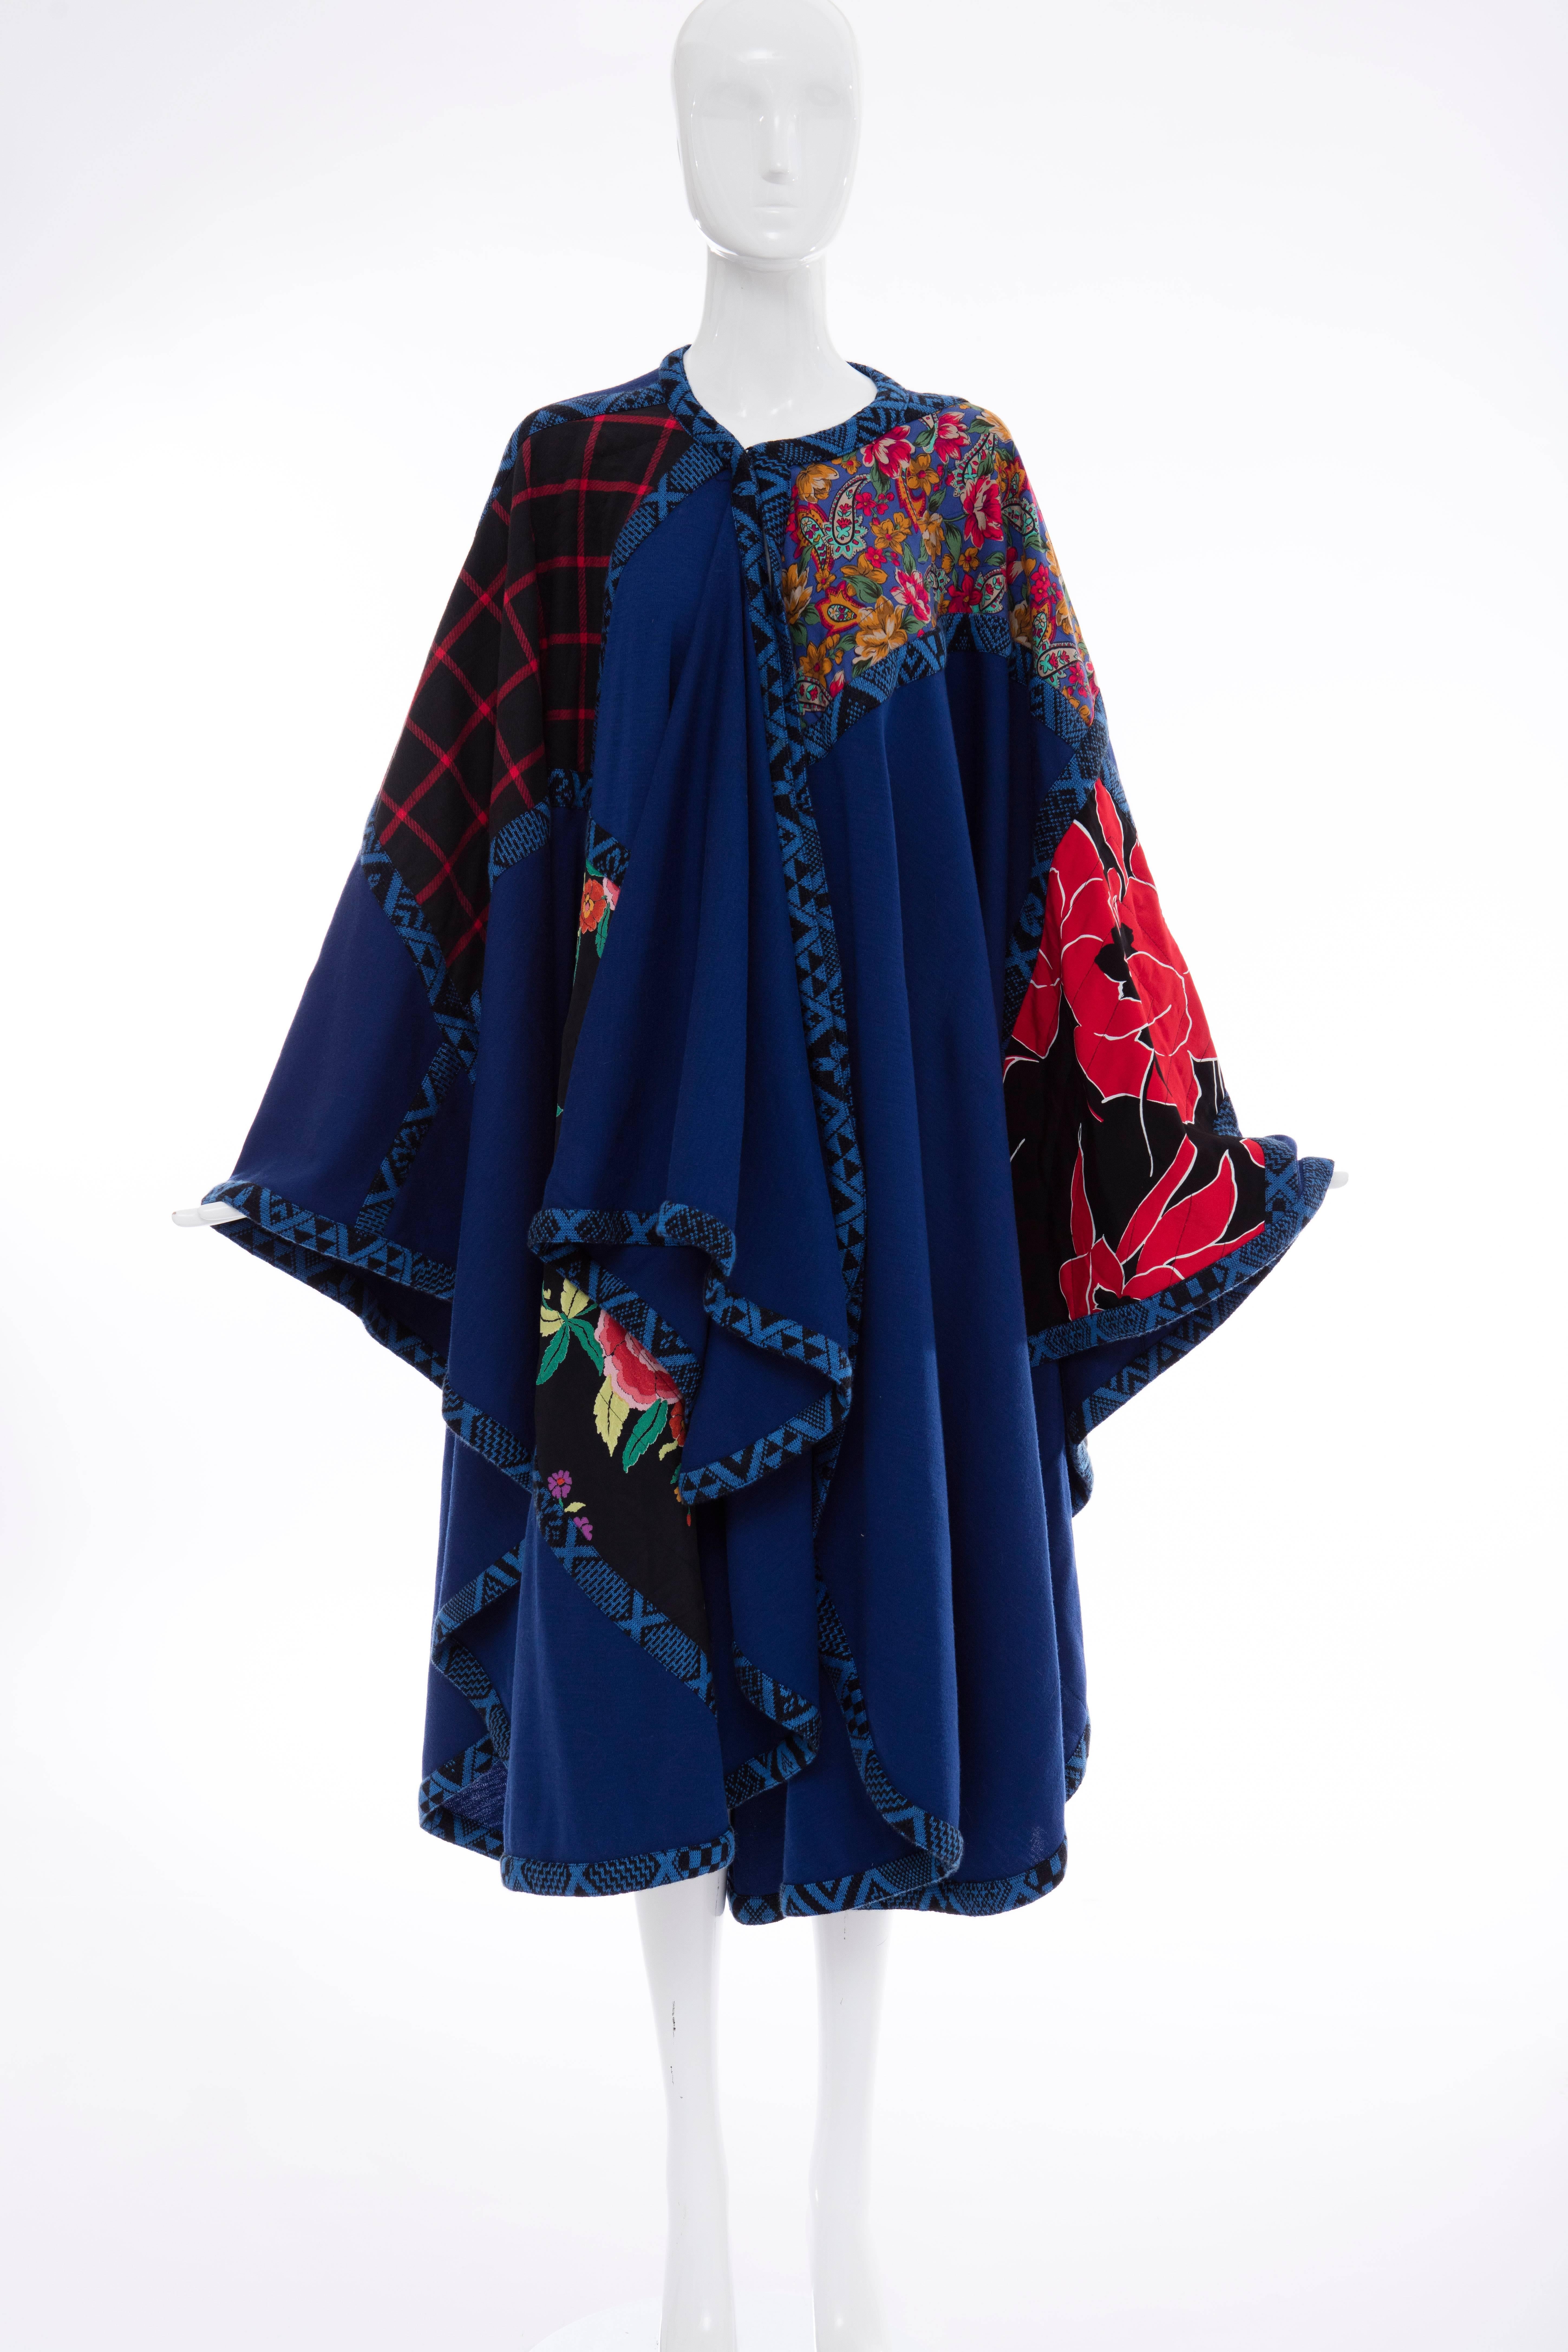 Koos Van Den Akker, circa 1980's royal blue cloak with floral and check quilted patchwork, graphic knit trim with hook-and-eye front closure.

One Size